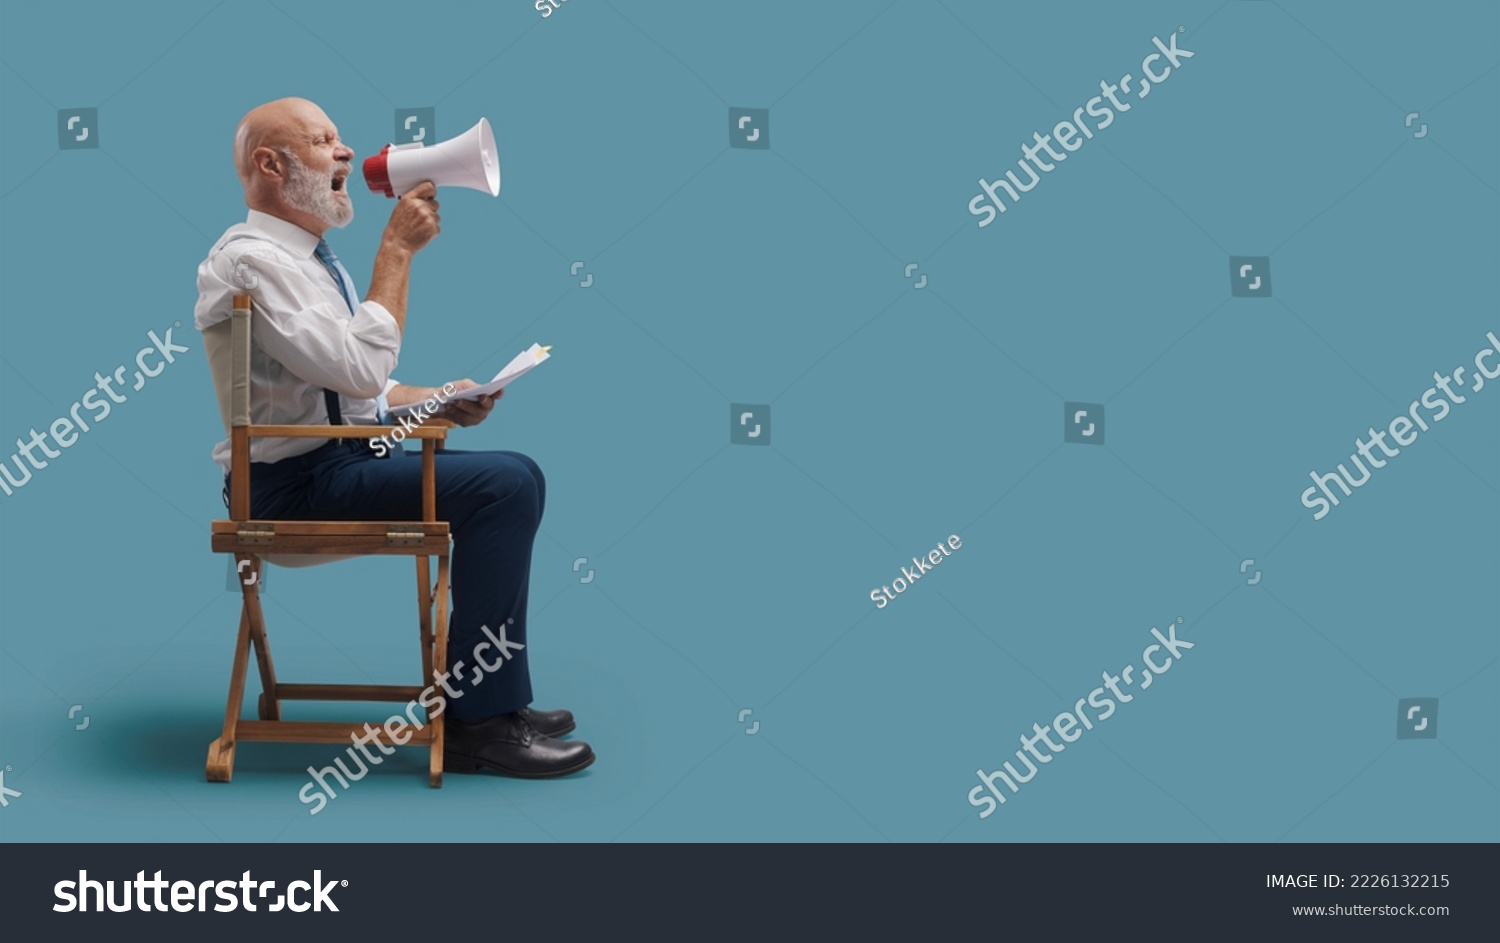 Confident professional film director sitting on the director's chair and shouting with a megaphone, film industry concept #2226132215